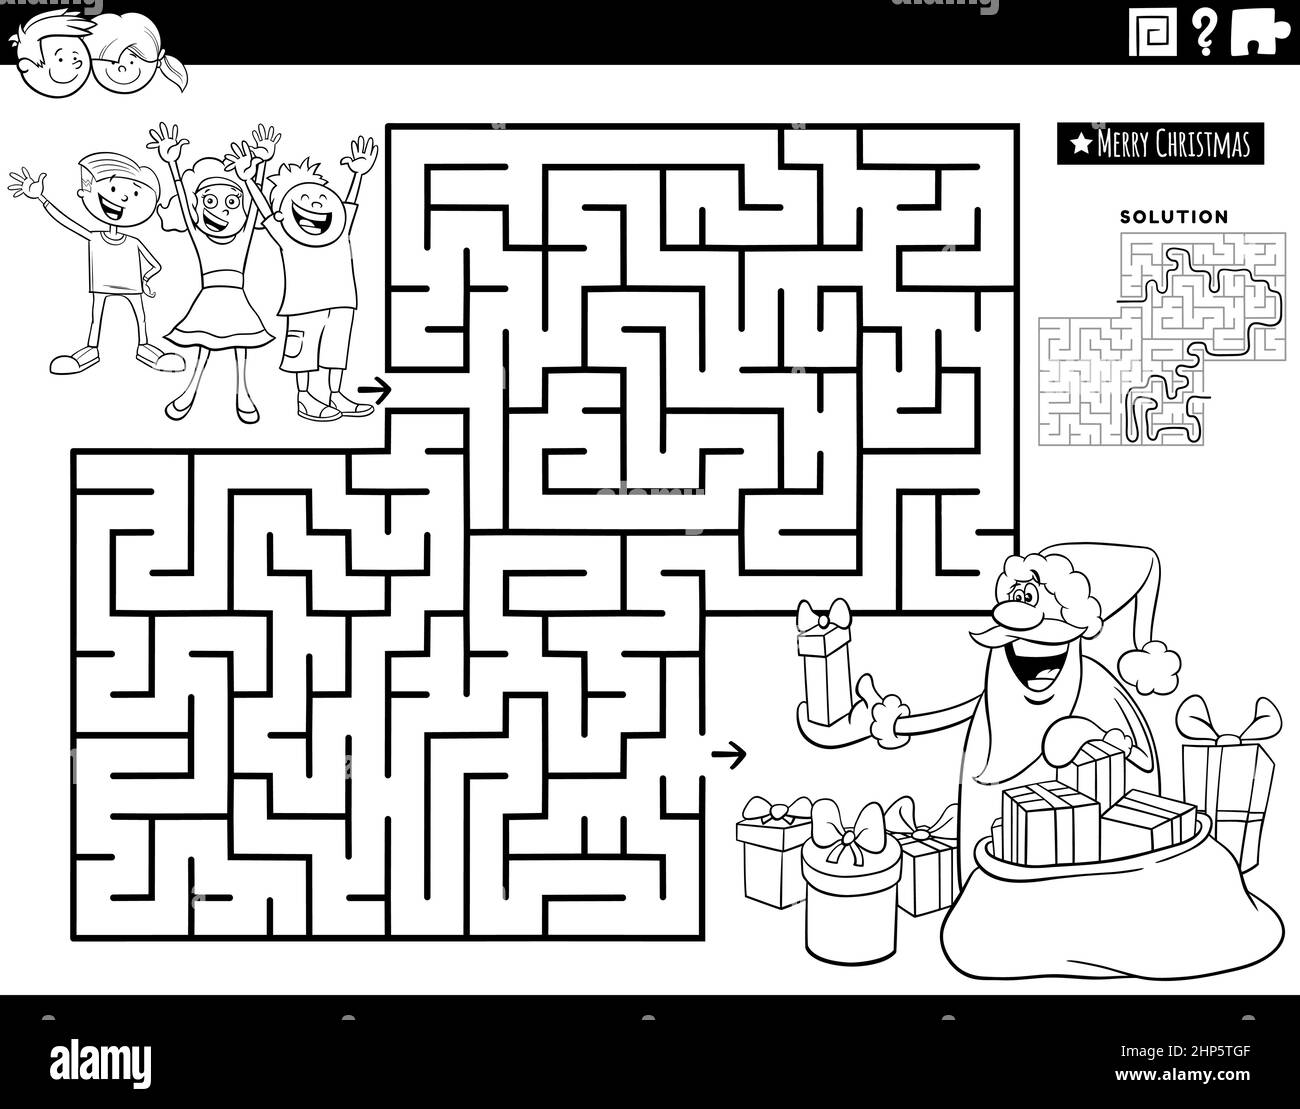 https://c8.alamy.com/comp/2HP5TGF/maze-with-santa-claus-and-kids-coloring-book-page-2HP5TGF.jpg